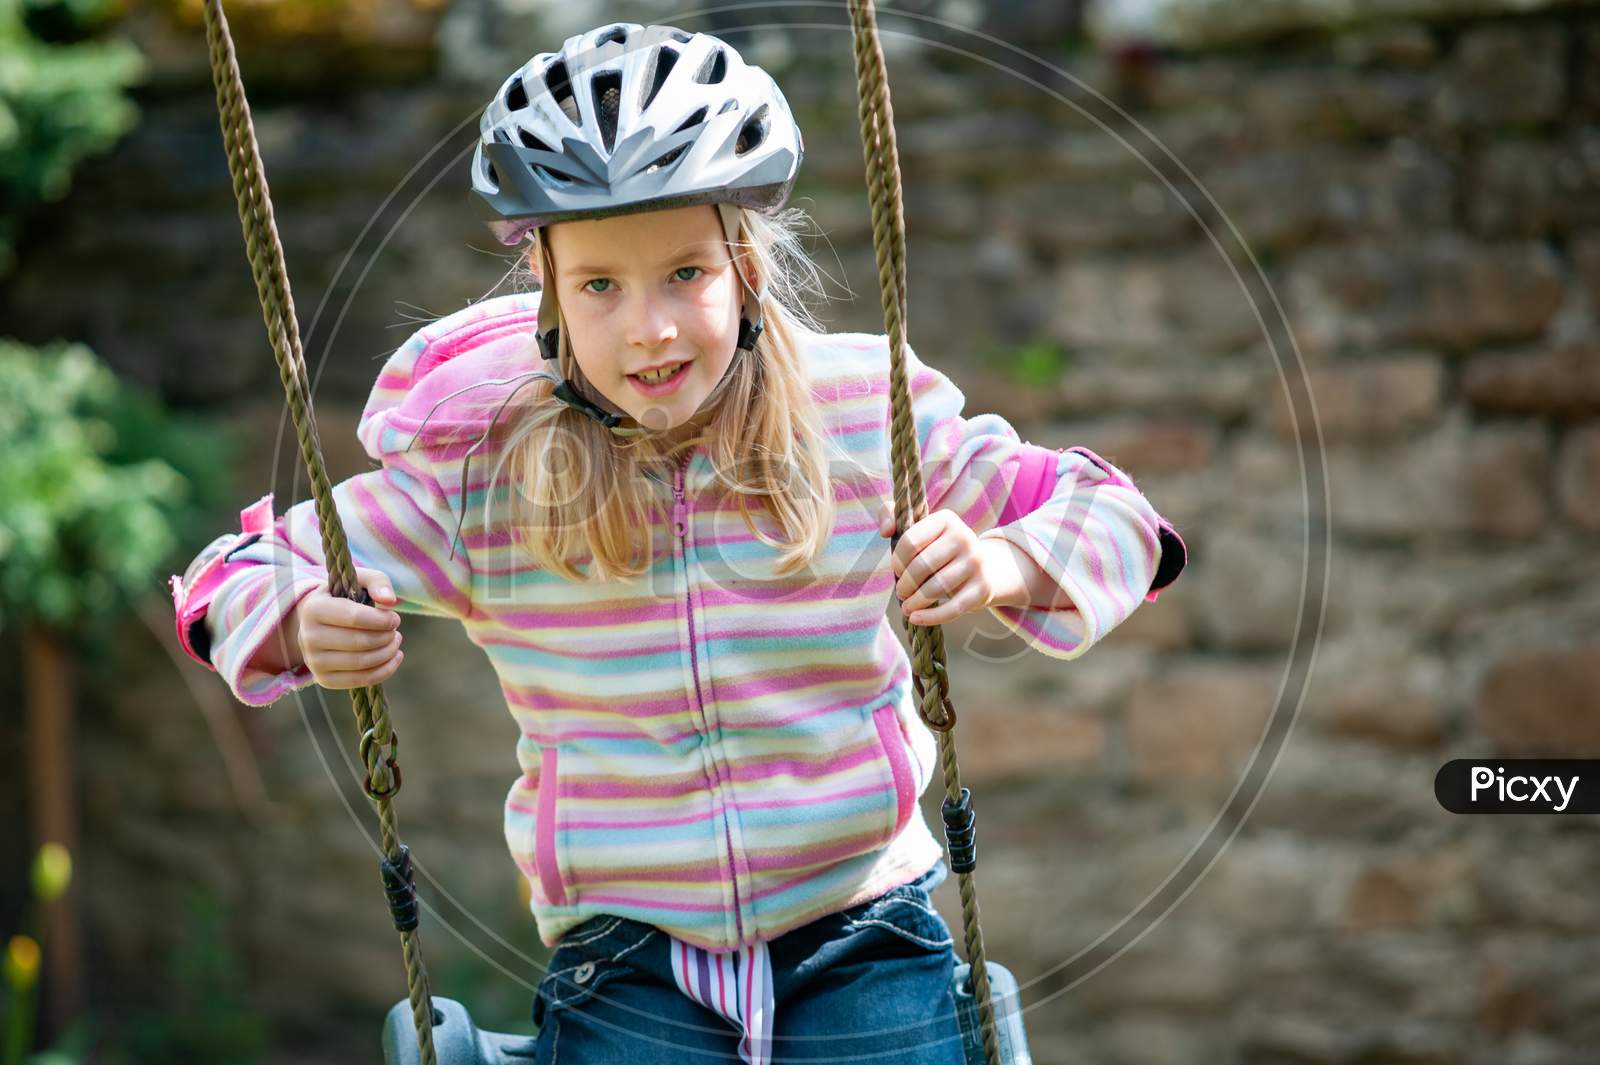 A Young Blonde Girl Wearing A Cycle Helmet While Swinging On A Garden Swing